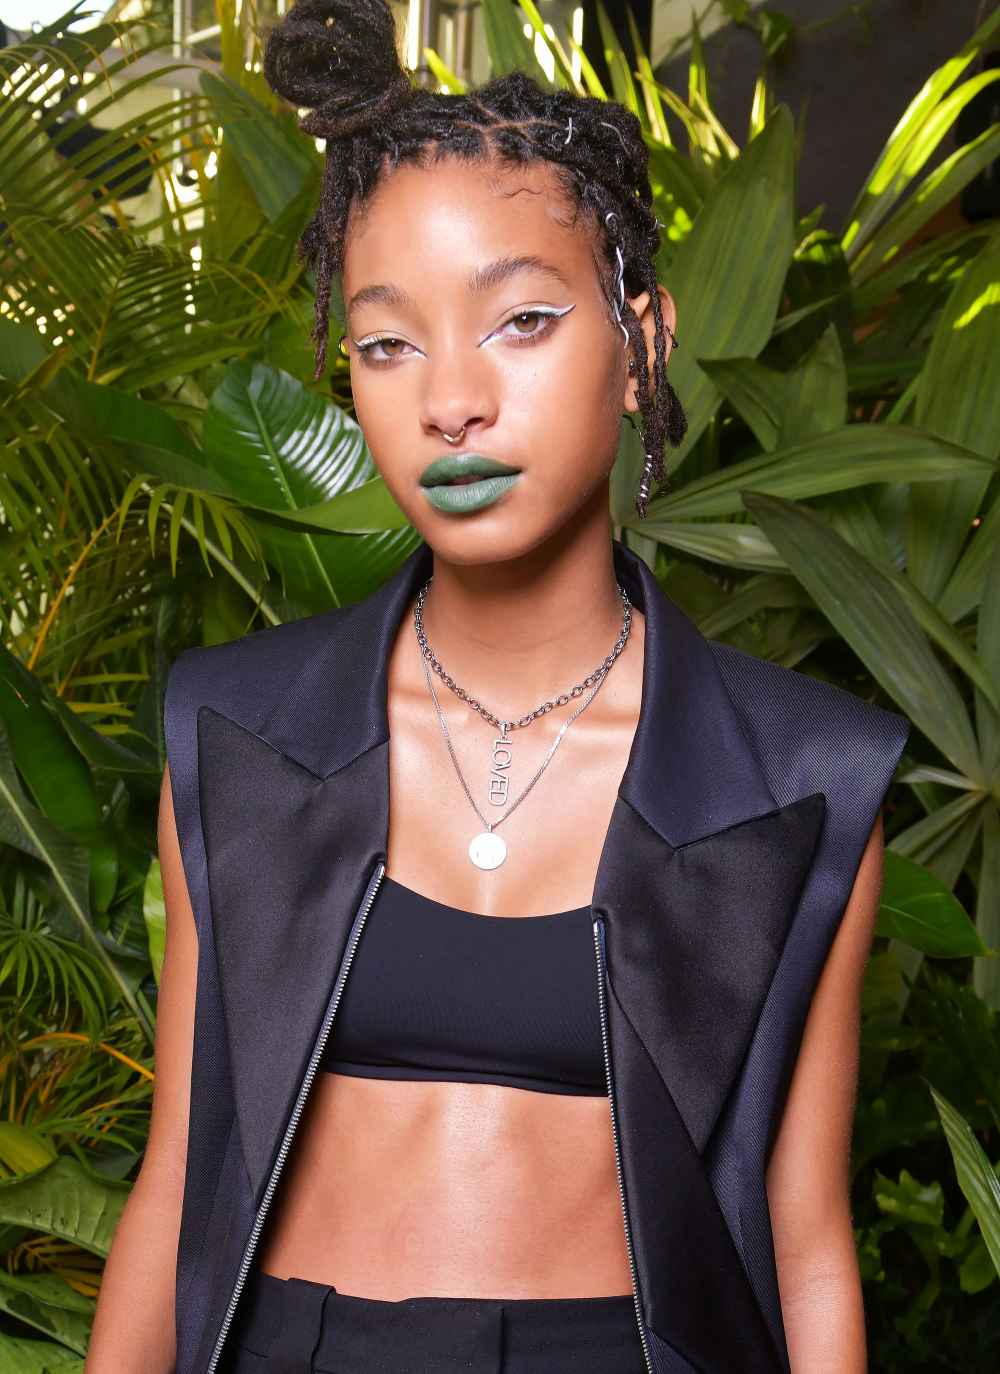 Willow Smith Shaves Her Head as Part of a Performance Art Piece